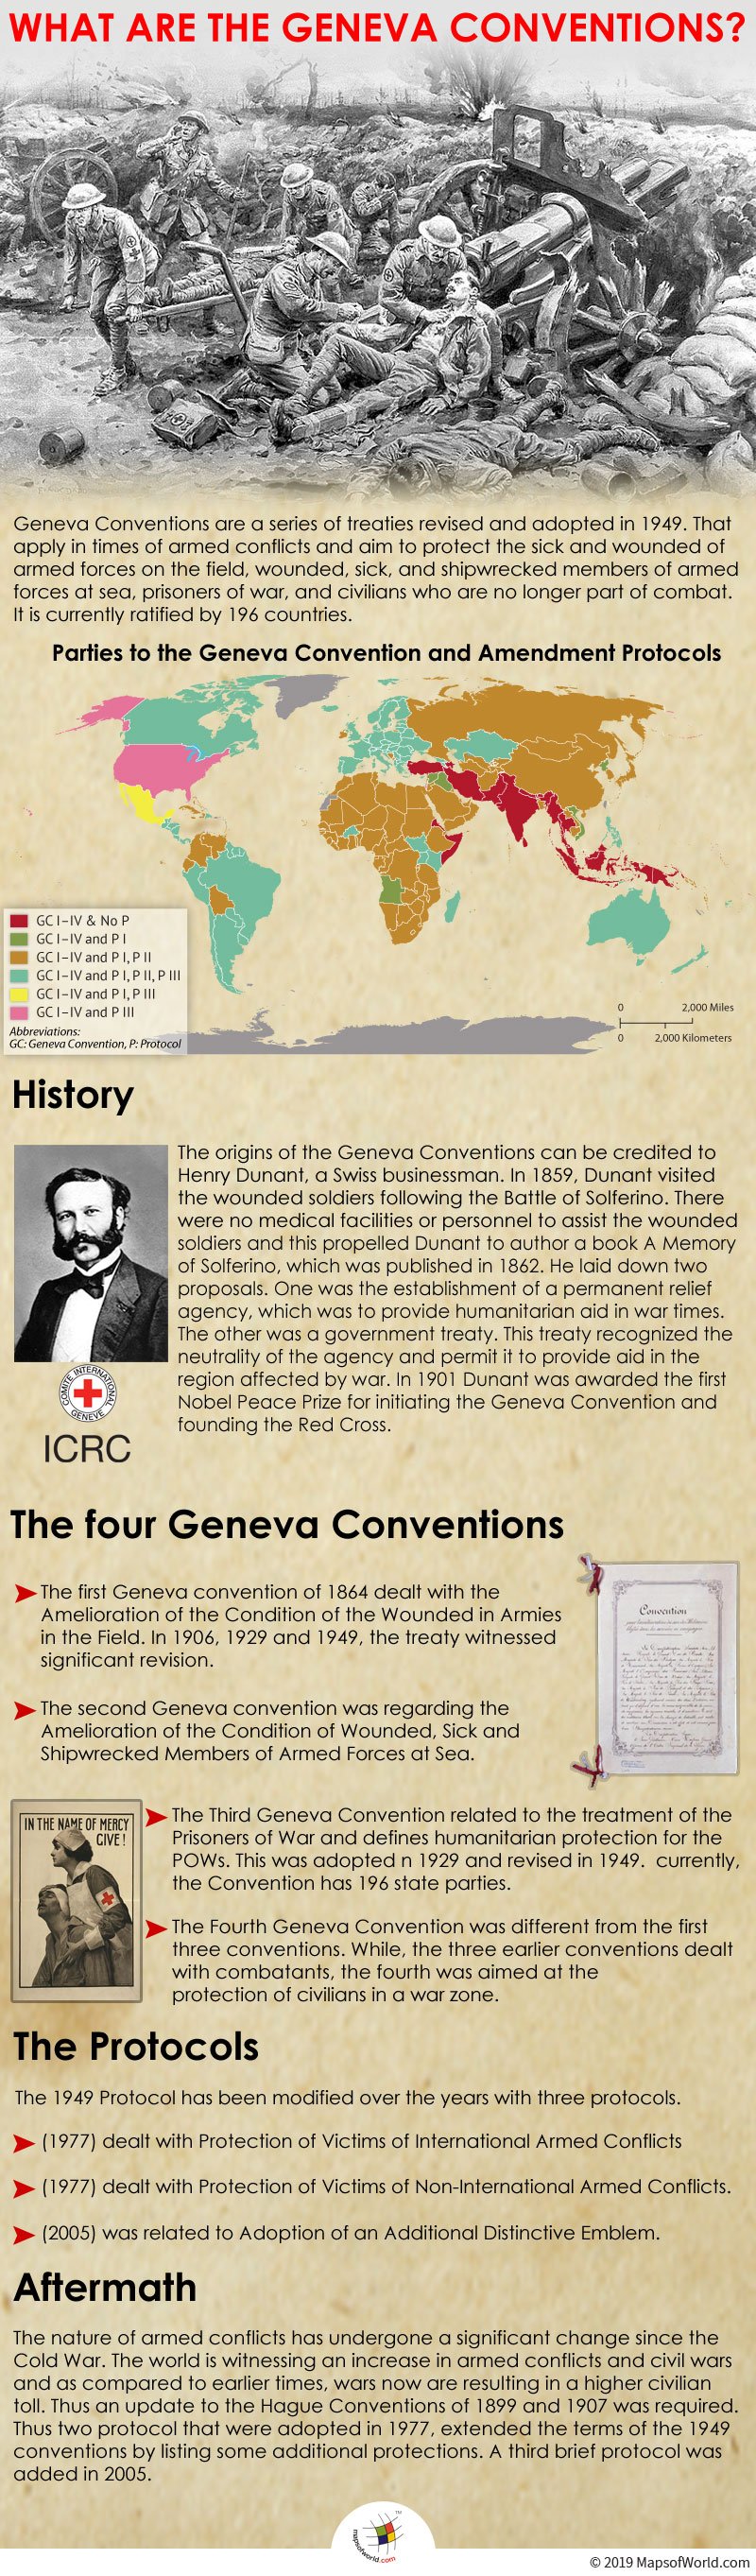 Infographic Giving Details on Geneva Conventions